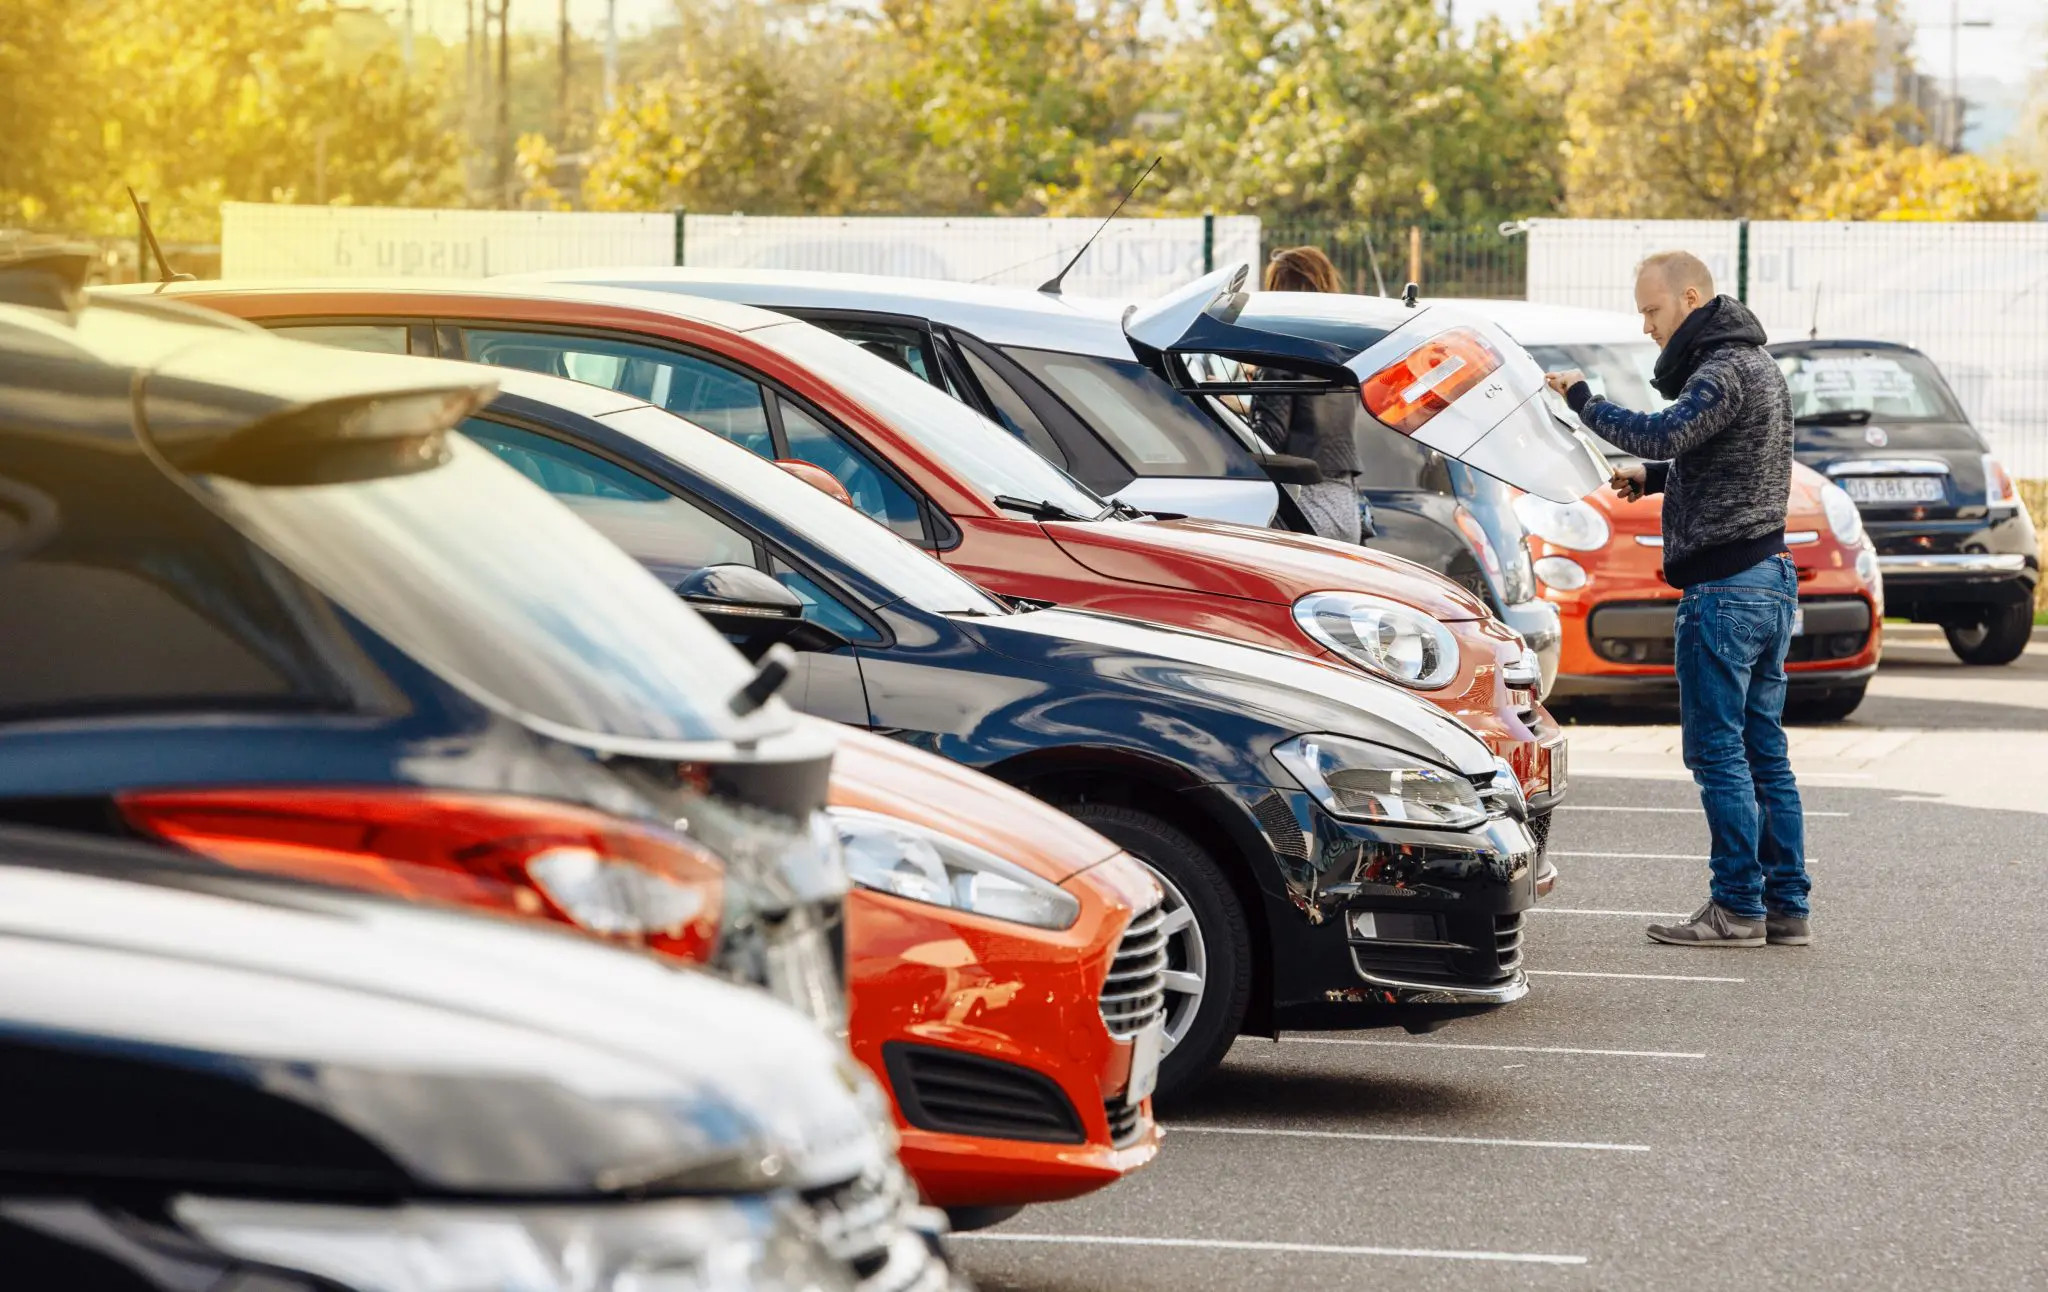 Saving Big: The Advantages of Buying Used Cars Over New